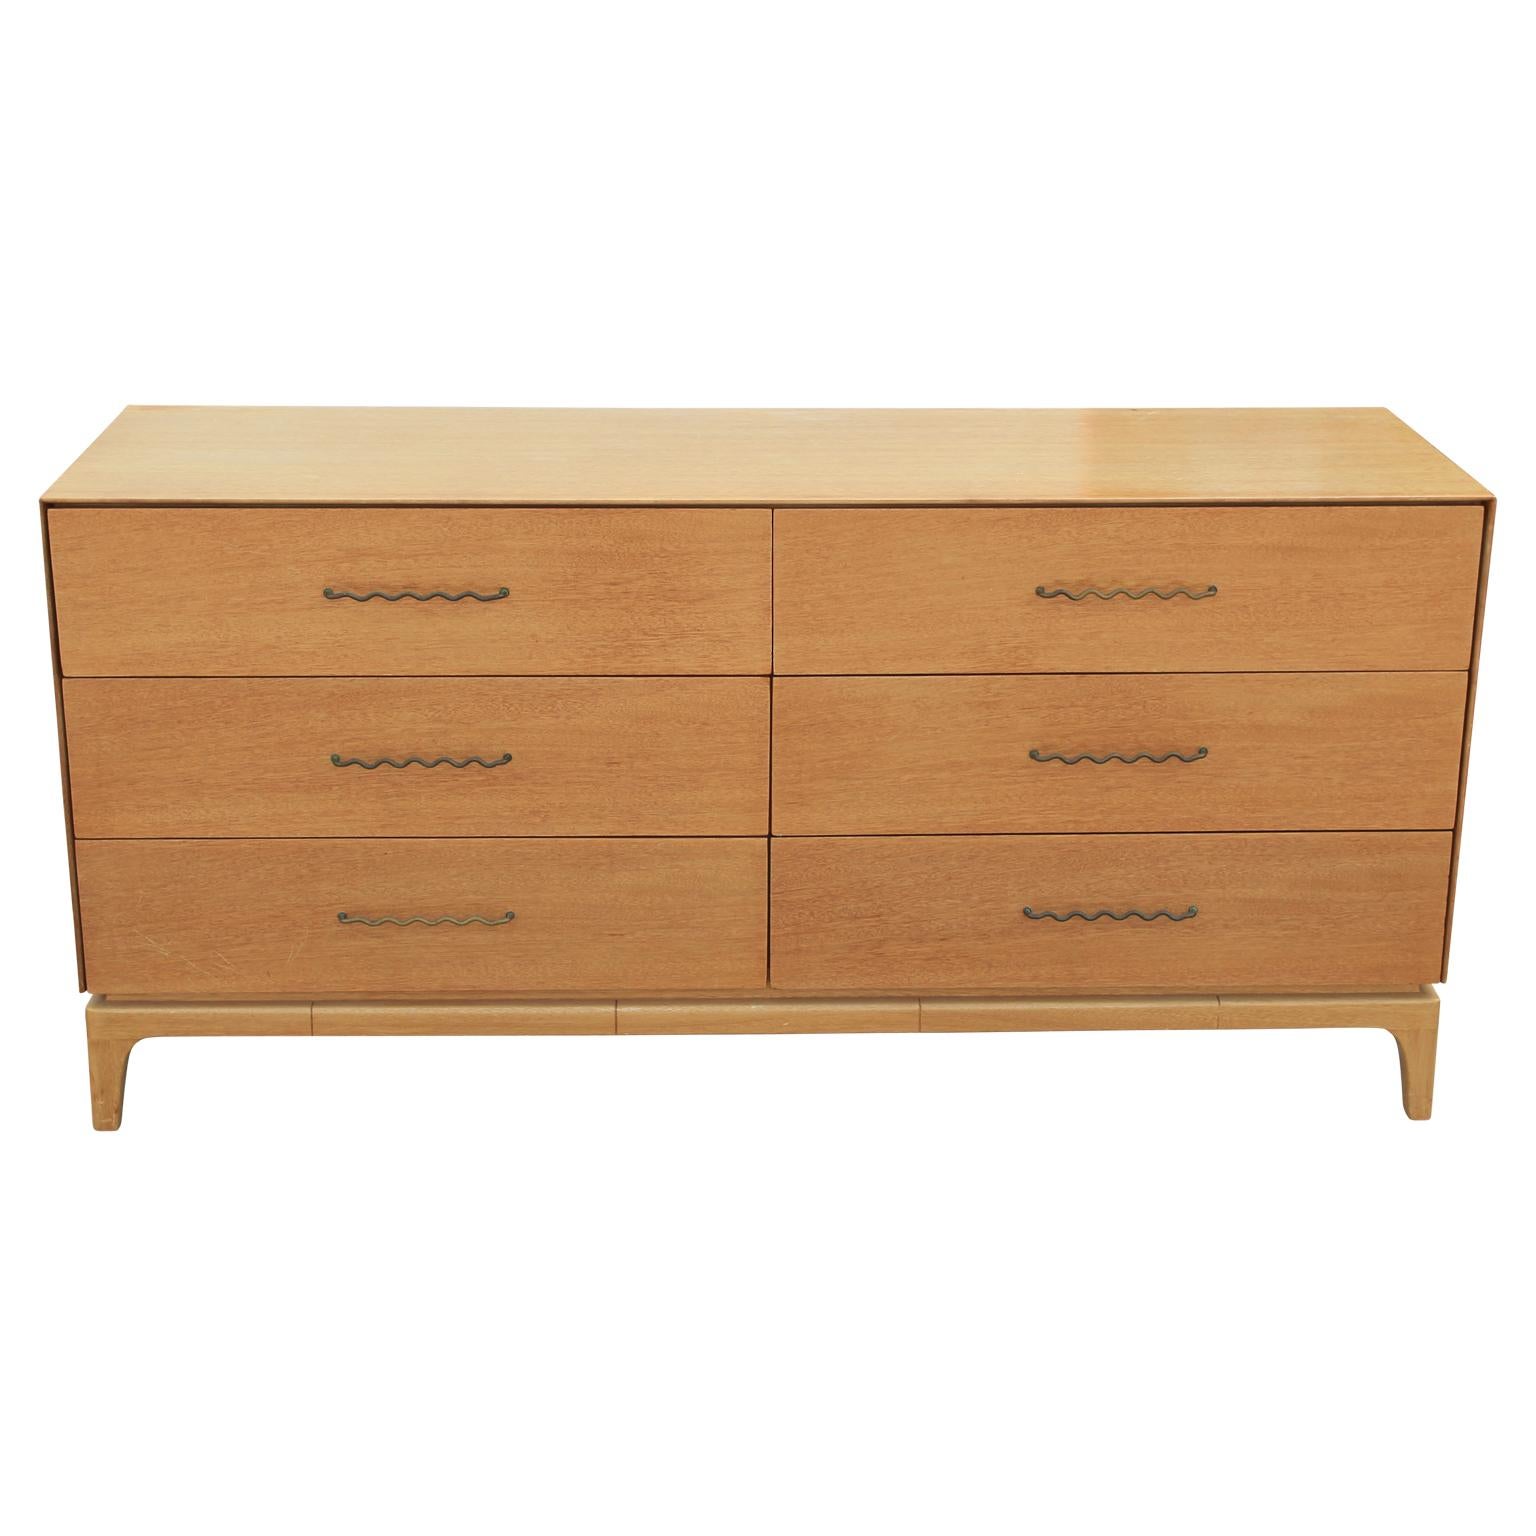 Mid-Century Modern mahogany sideboard/dresser by John Keal for Brown Saltman. There are six drawers accented with beautiful sculptural brass pulls. The piece has interesting line motifs on the base and is in original condition but can be refinished